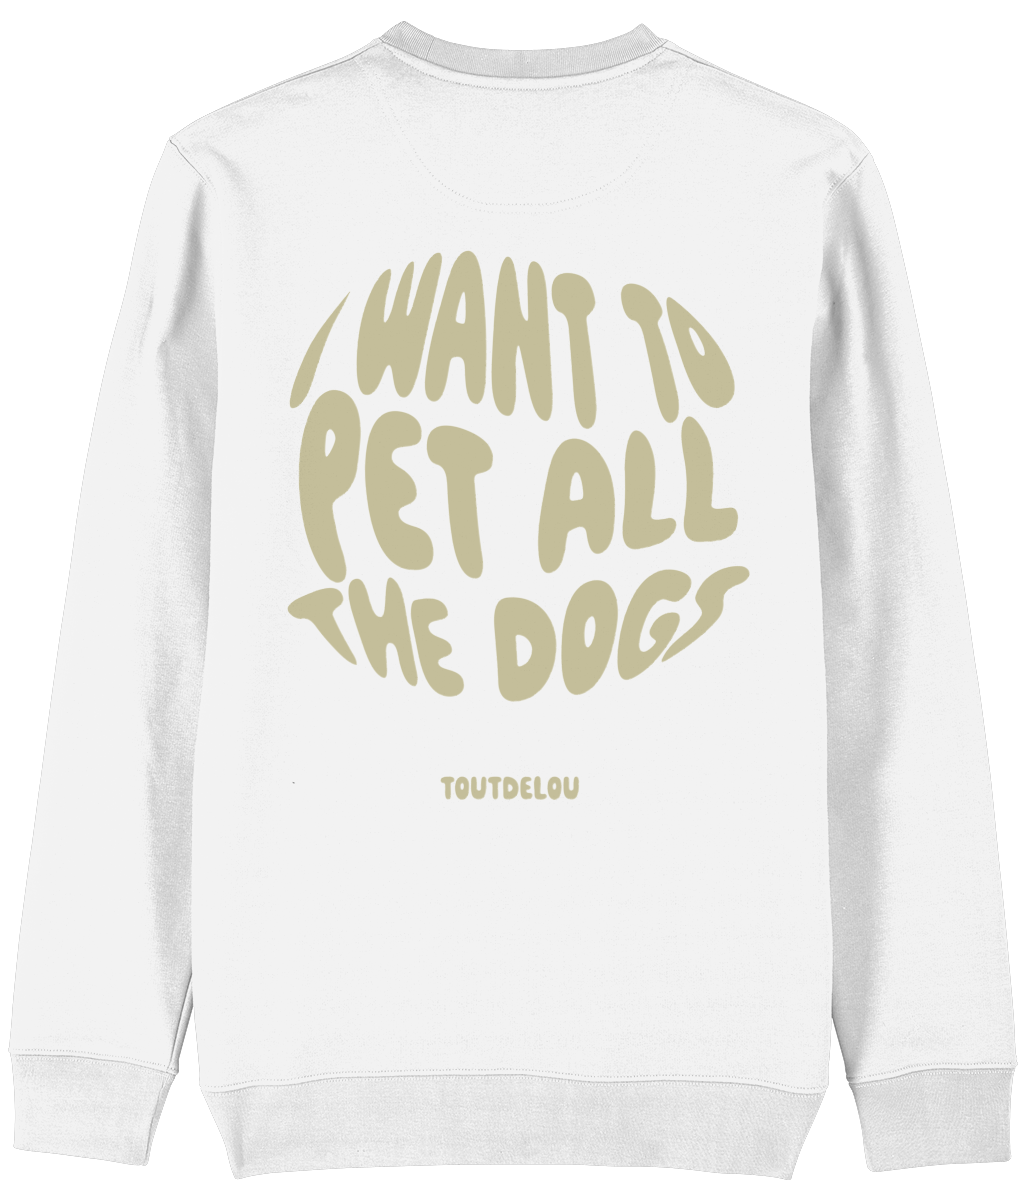 Sweater - pet all the dogs - olive - print on front and back